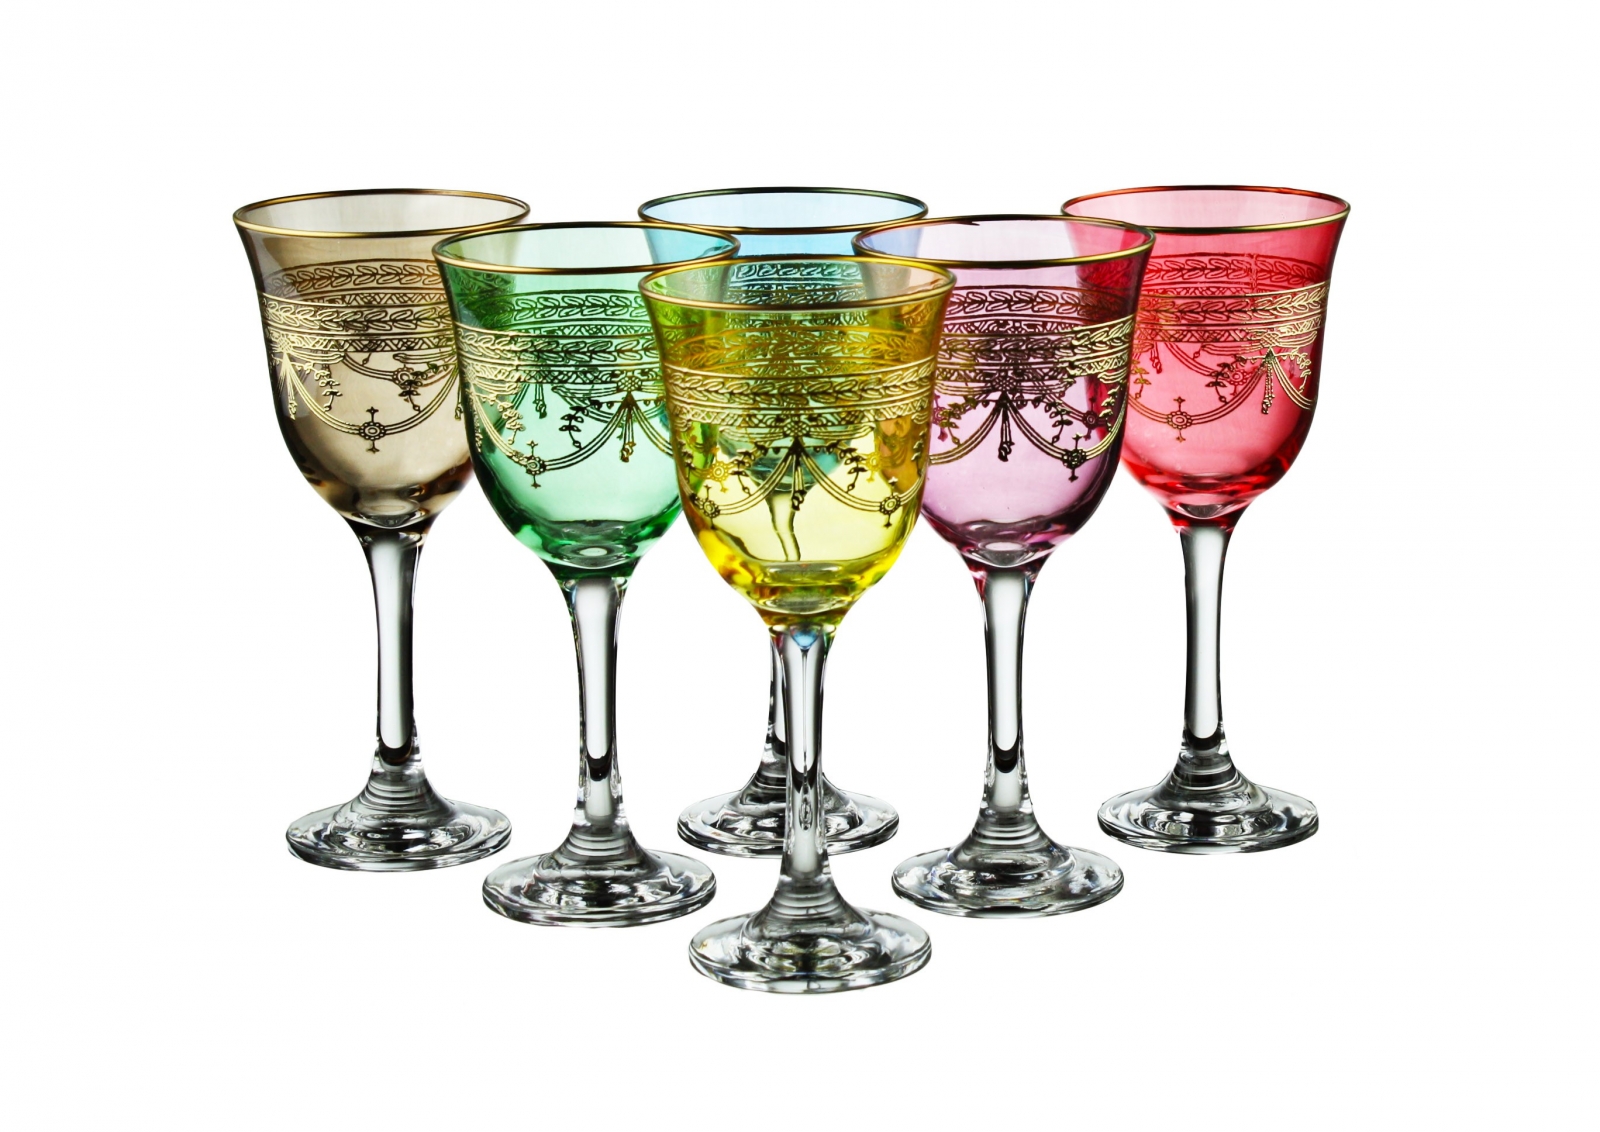 Set of 6 Colored Water Glasses With Rich Gold Design- Dishwashing Safe